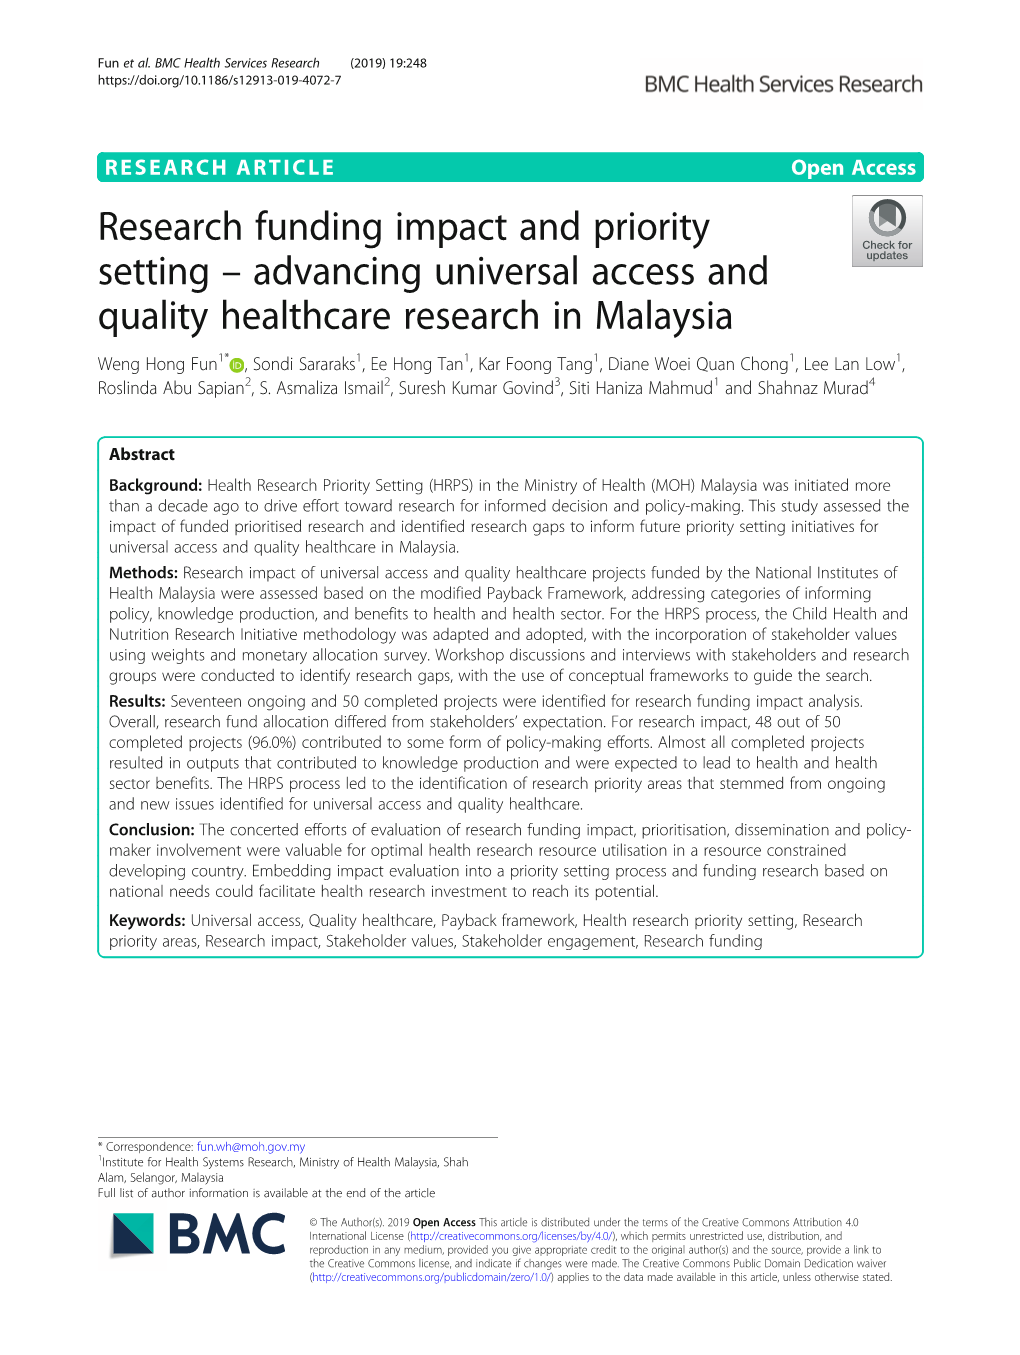 Research Funding Impact and Priority Setting – Advancing Universal